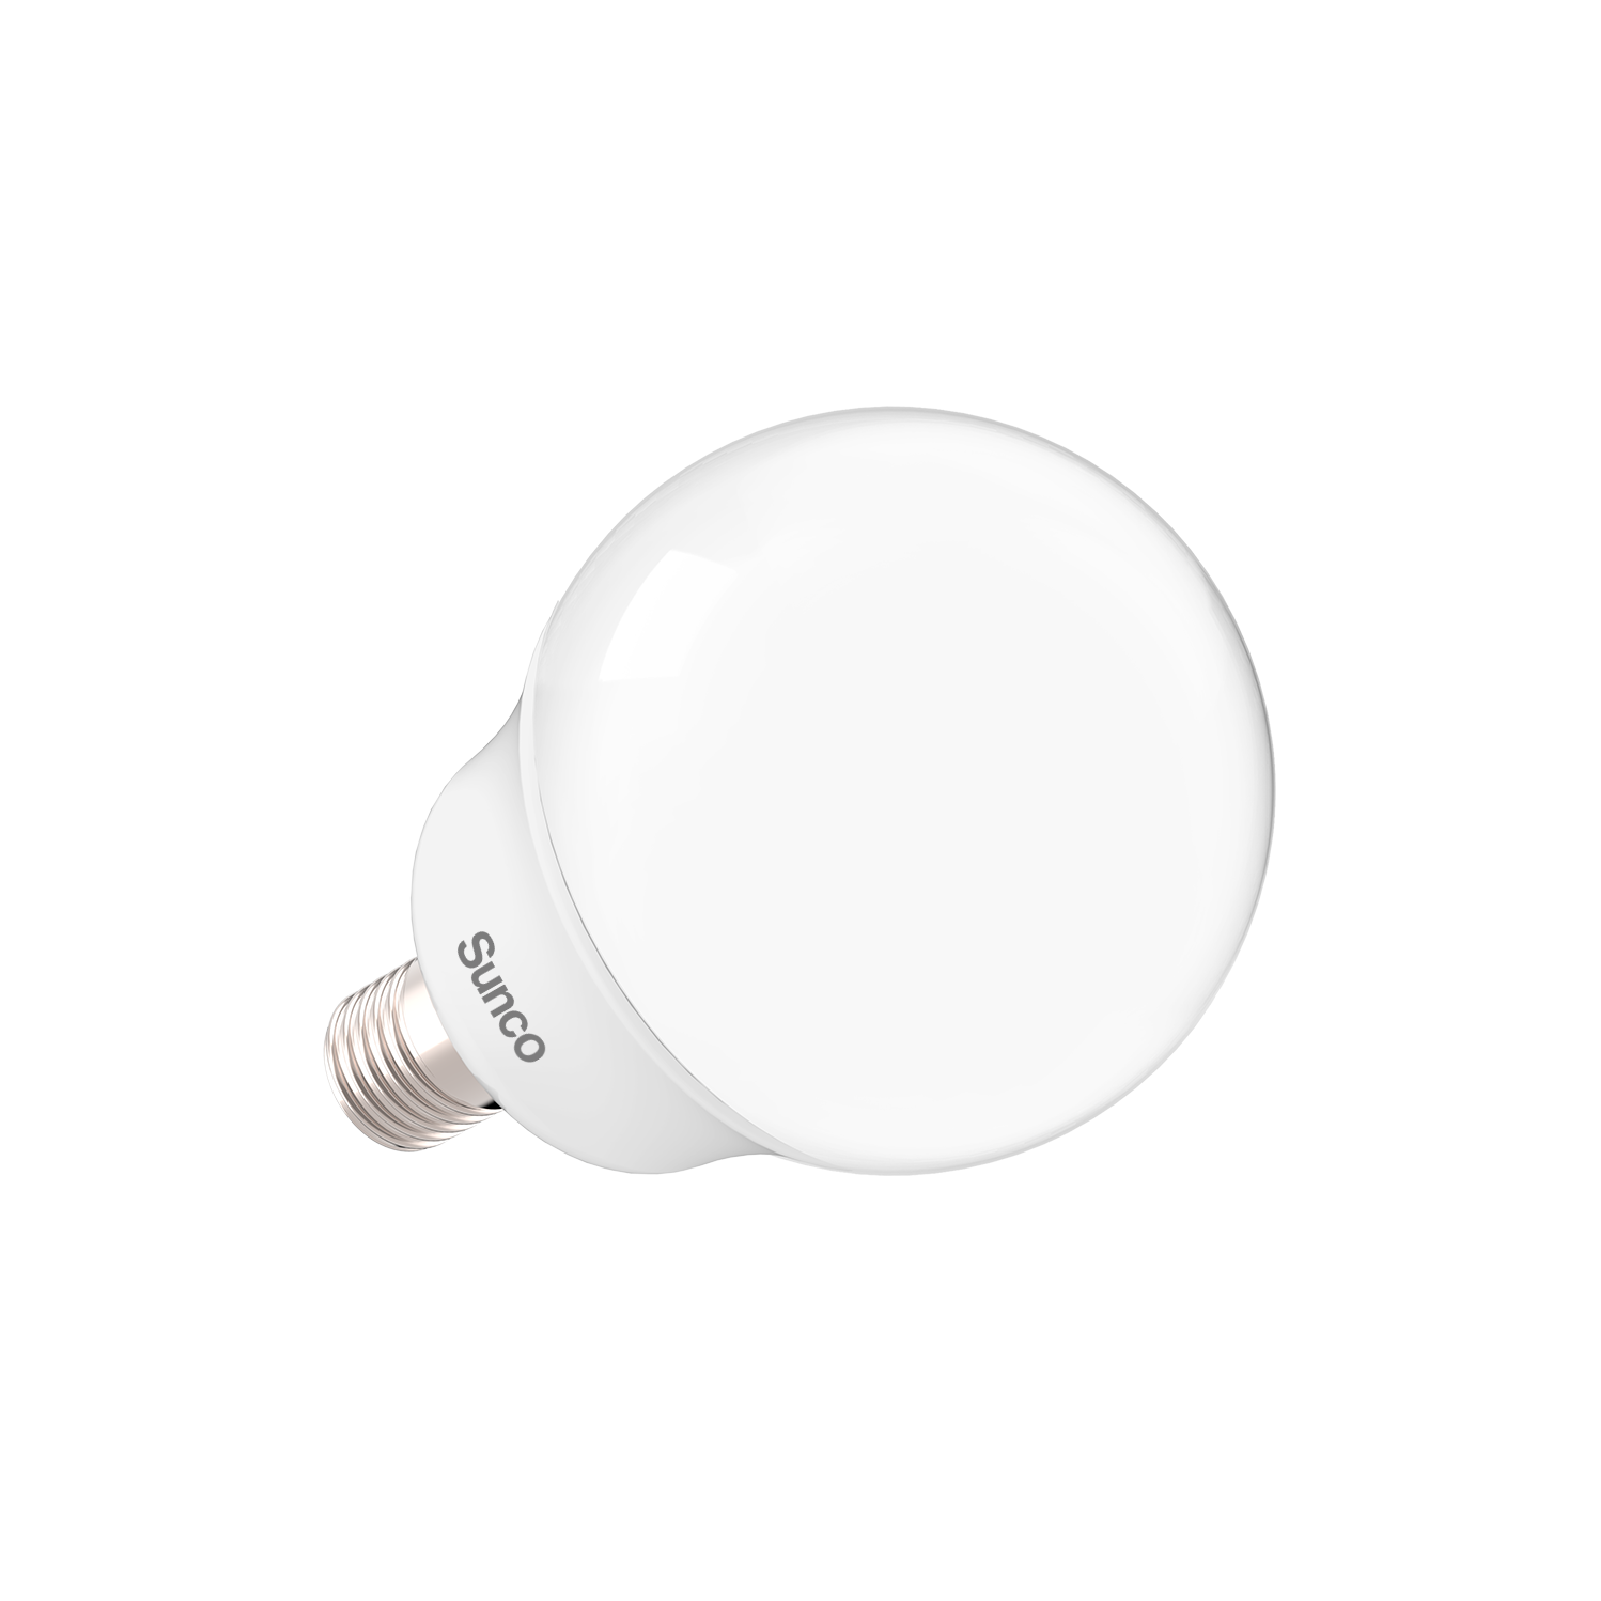 Sunco long-lasting, 5W G14 LED Bulbs are compact, decorative, and offer a low wattage LED alternative – just 5W – as an equivalent to 40W bulbs. This globe light works well in vanities, chandeliers, pendant fixtures, and in small light fixtures for desks and tables. The bulb is RoHS, FCC, and UL listed.